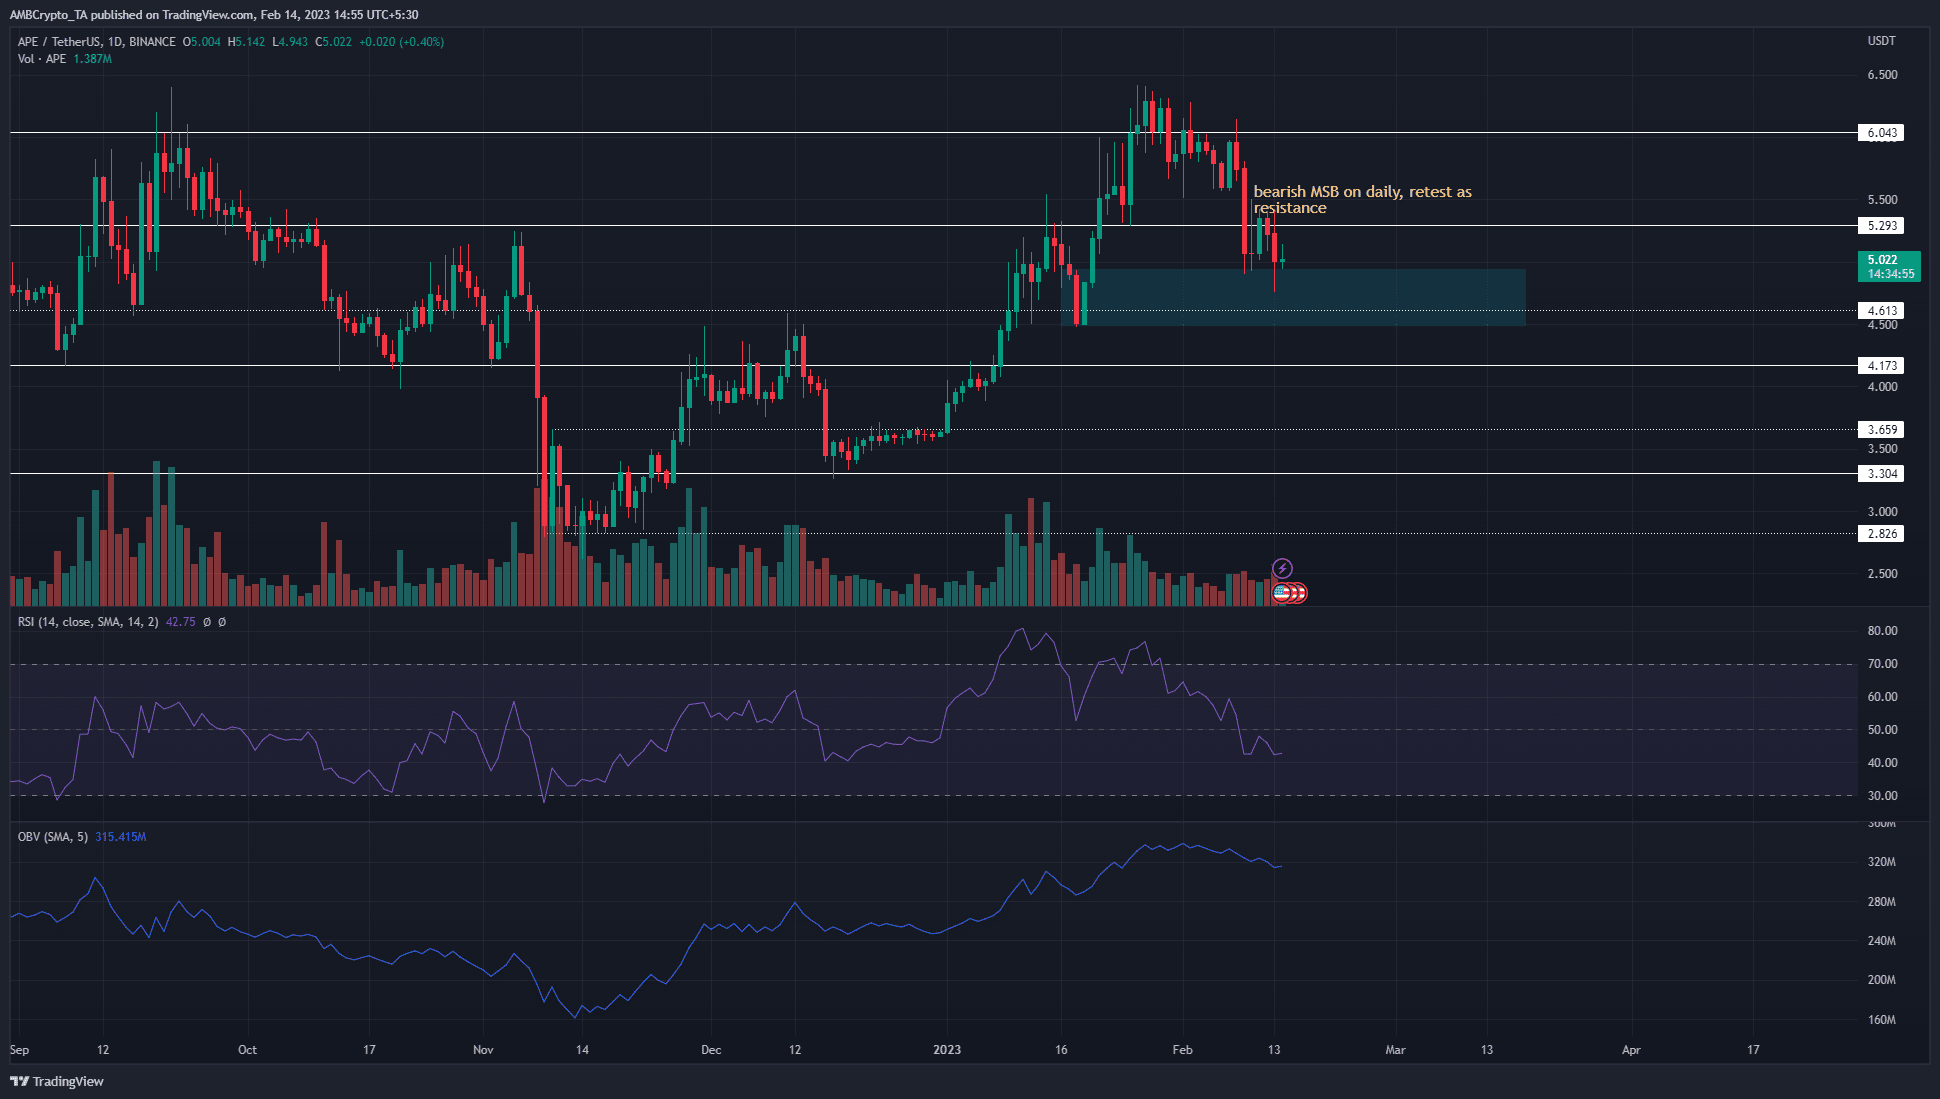 ApeCoin is perched atop $5 and the uptrend is unbroken thus far